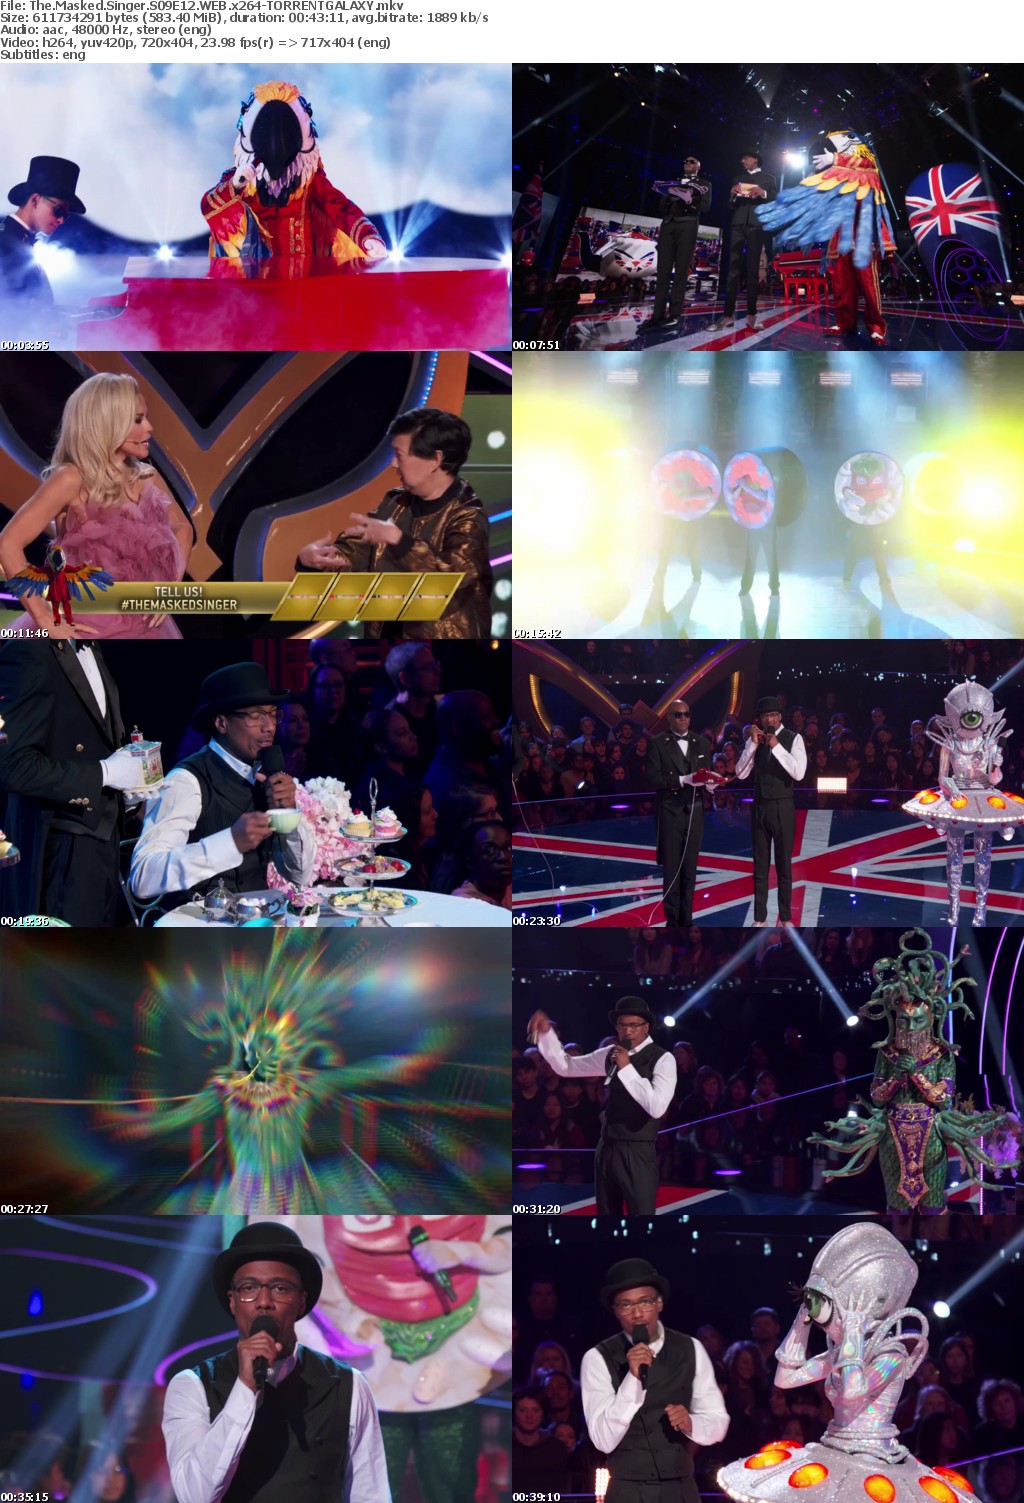 The Masked Singer S09E12 WEB x264-GALAXY